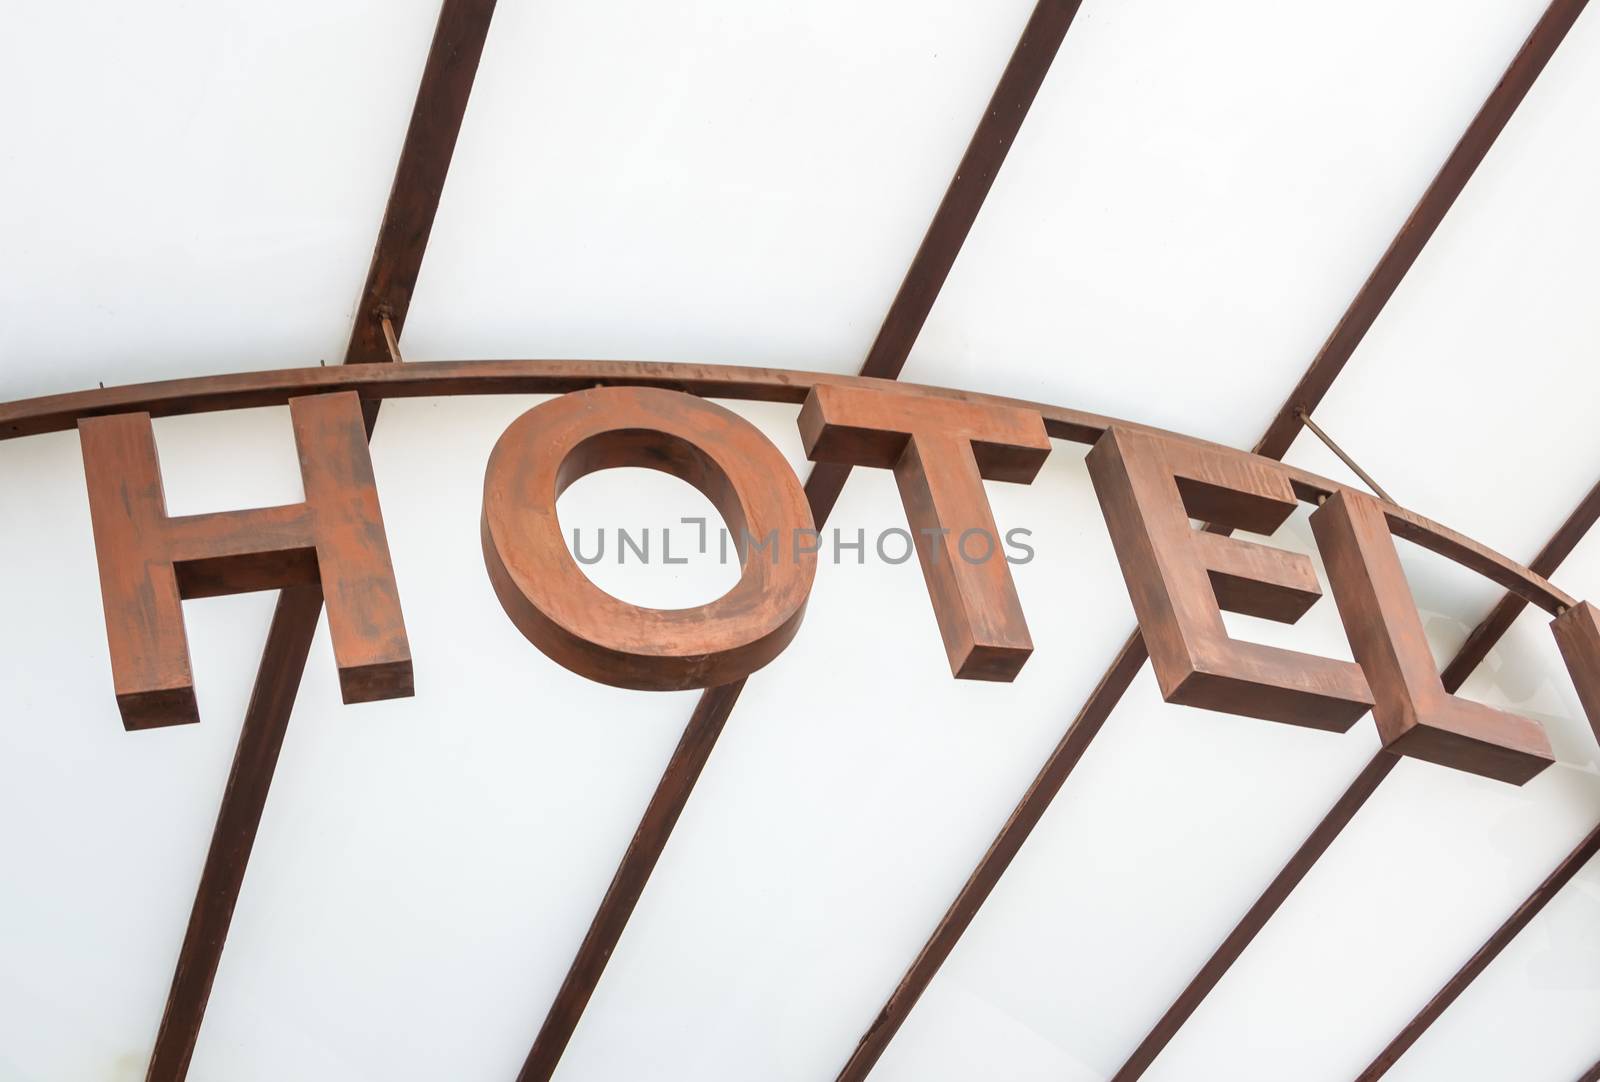 Modern hotel sign over a glass canopy entrance